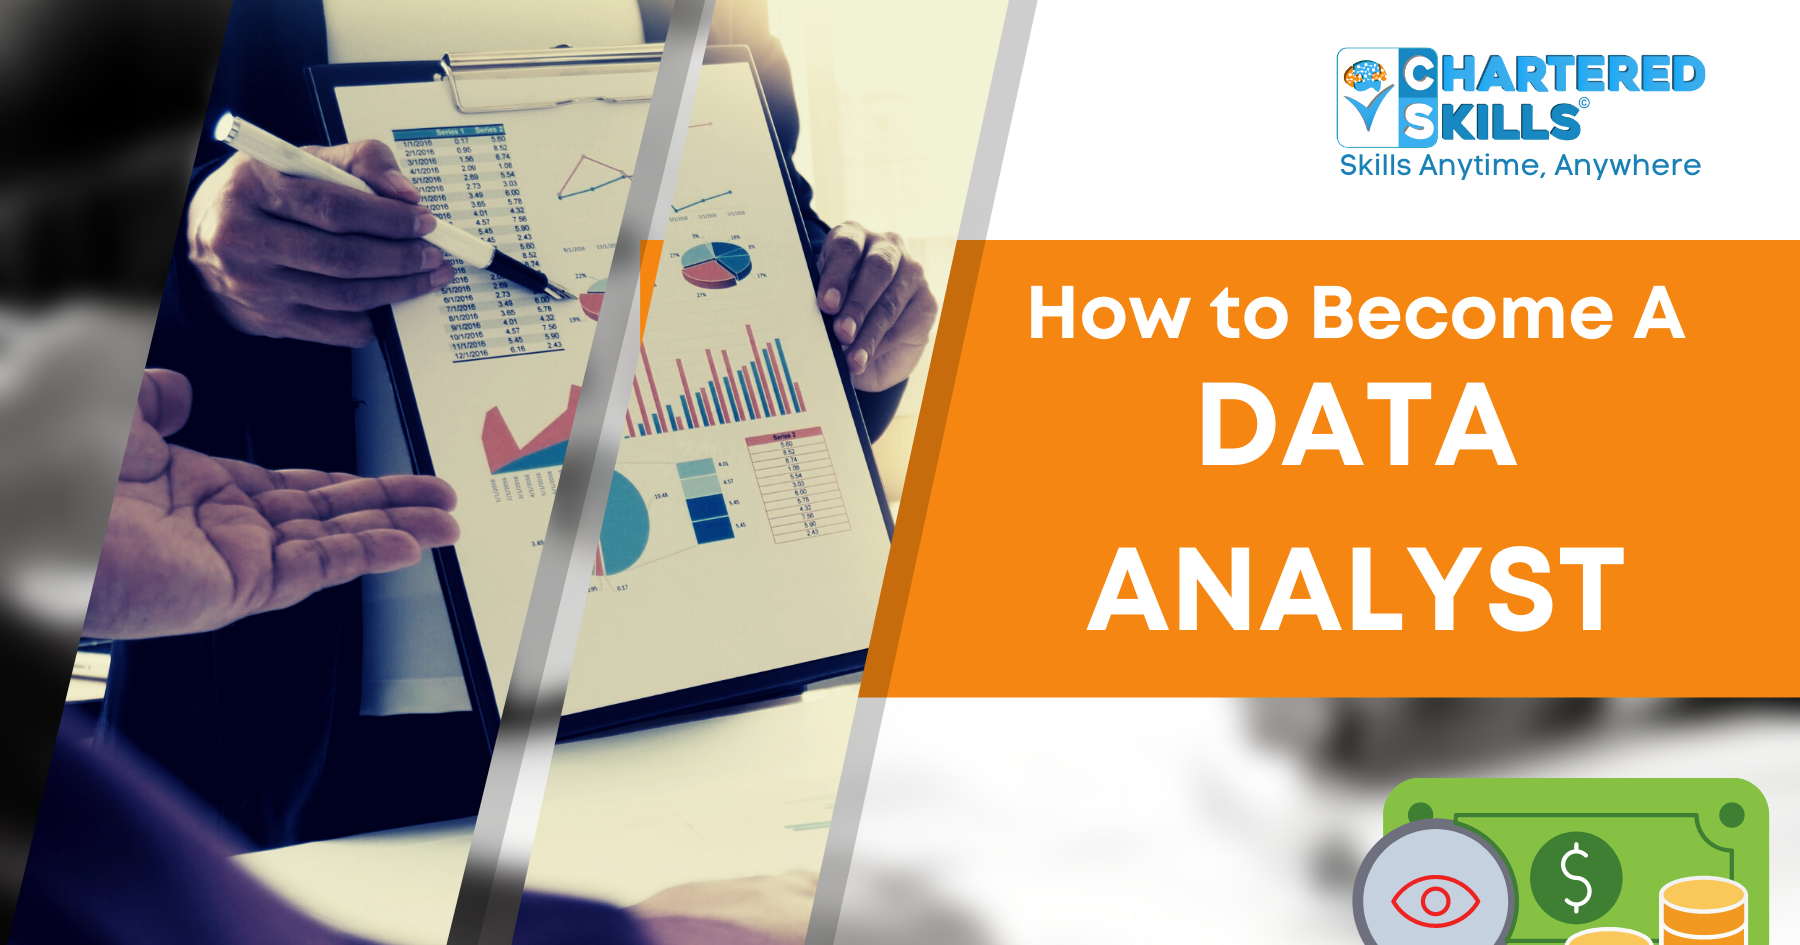 How to become a data analyst?